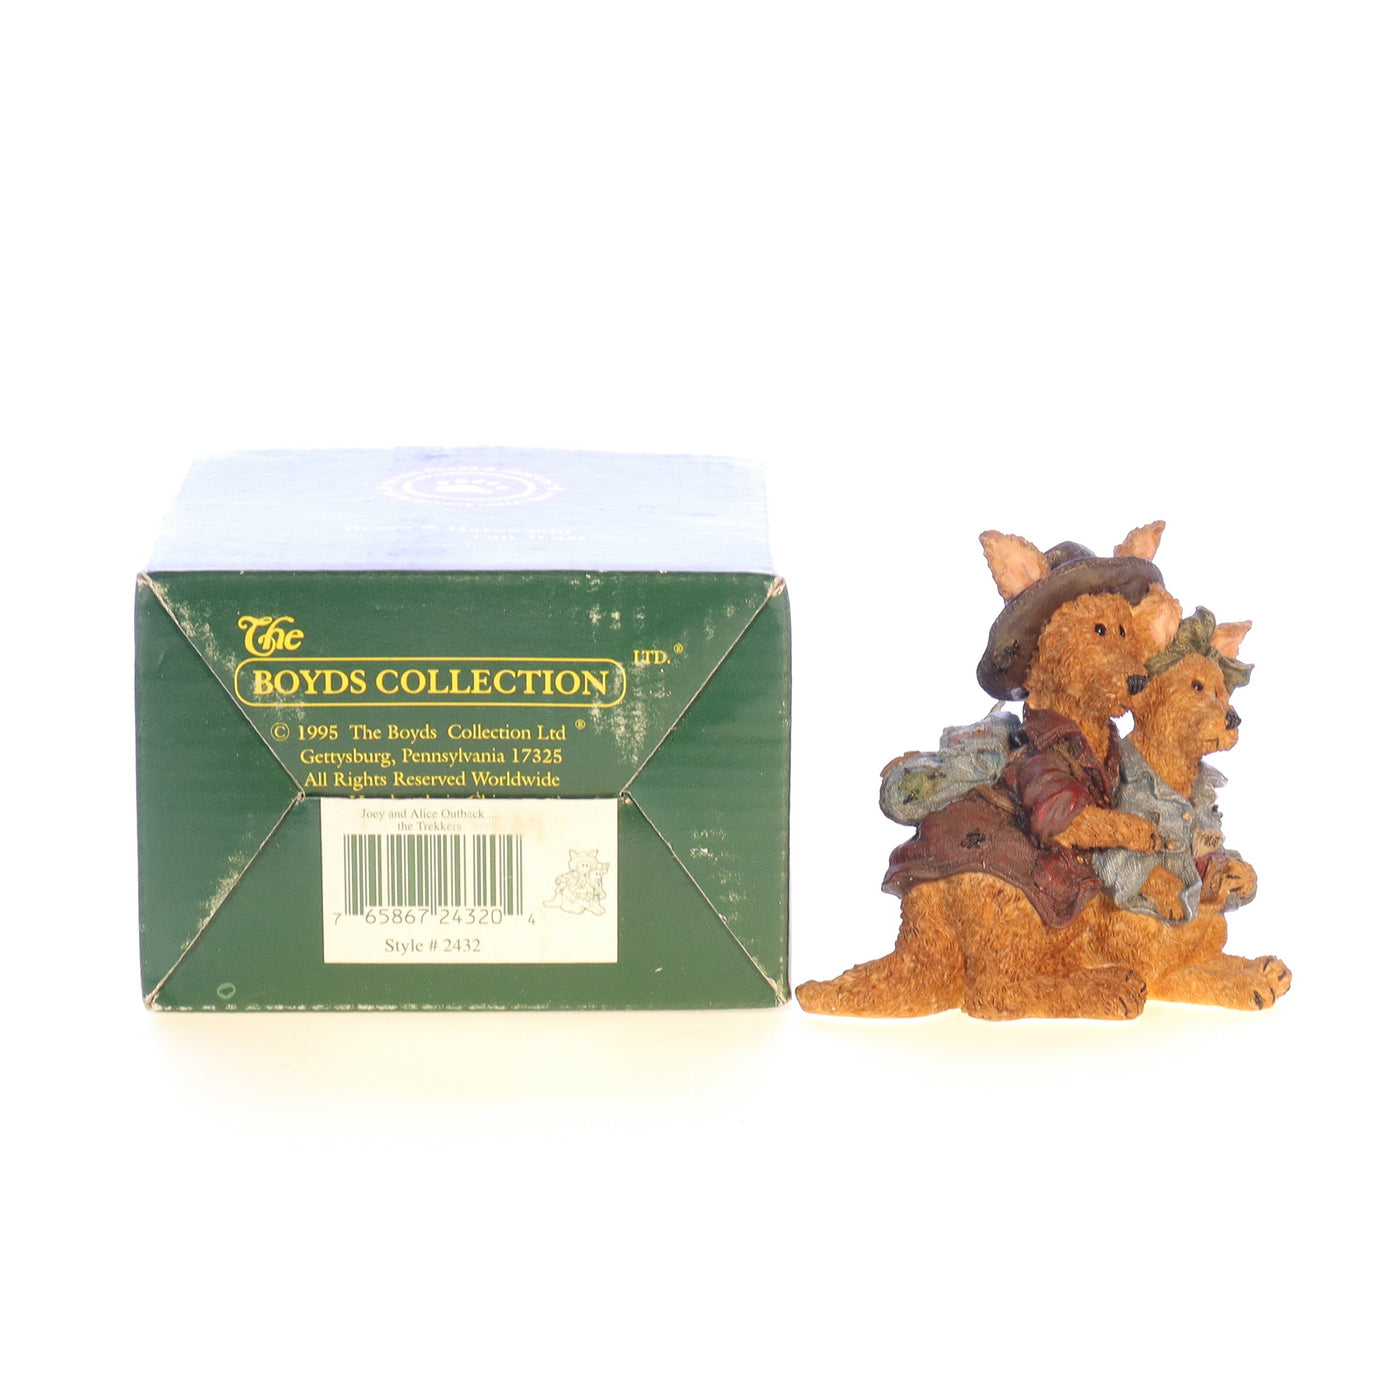 Boyds Bears Resin Figurine in Box 2432 Joey and Alice Outback ... the Trekkers 3"